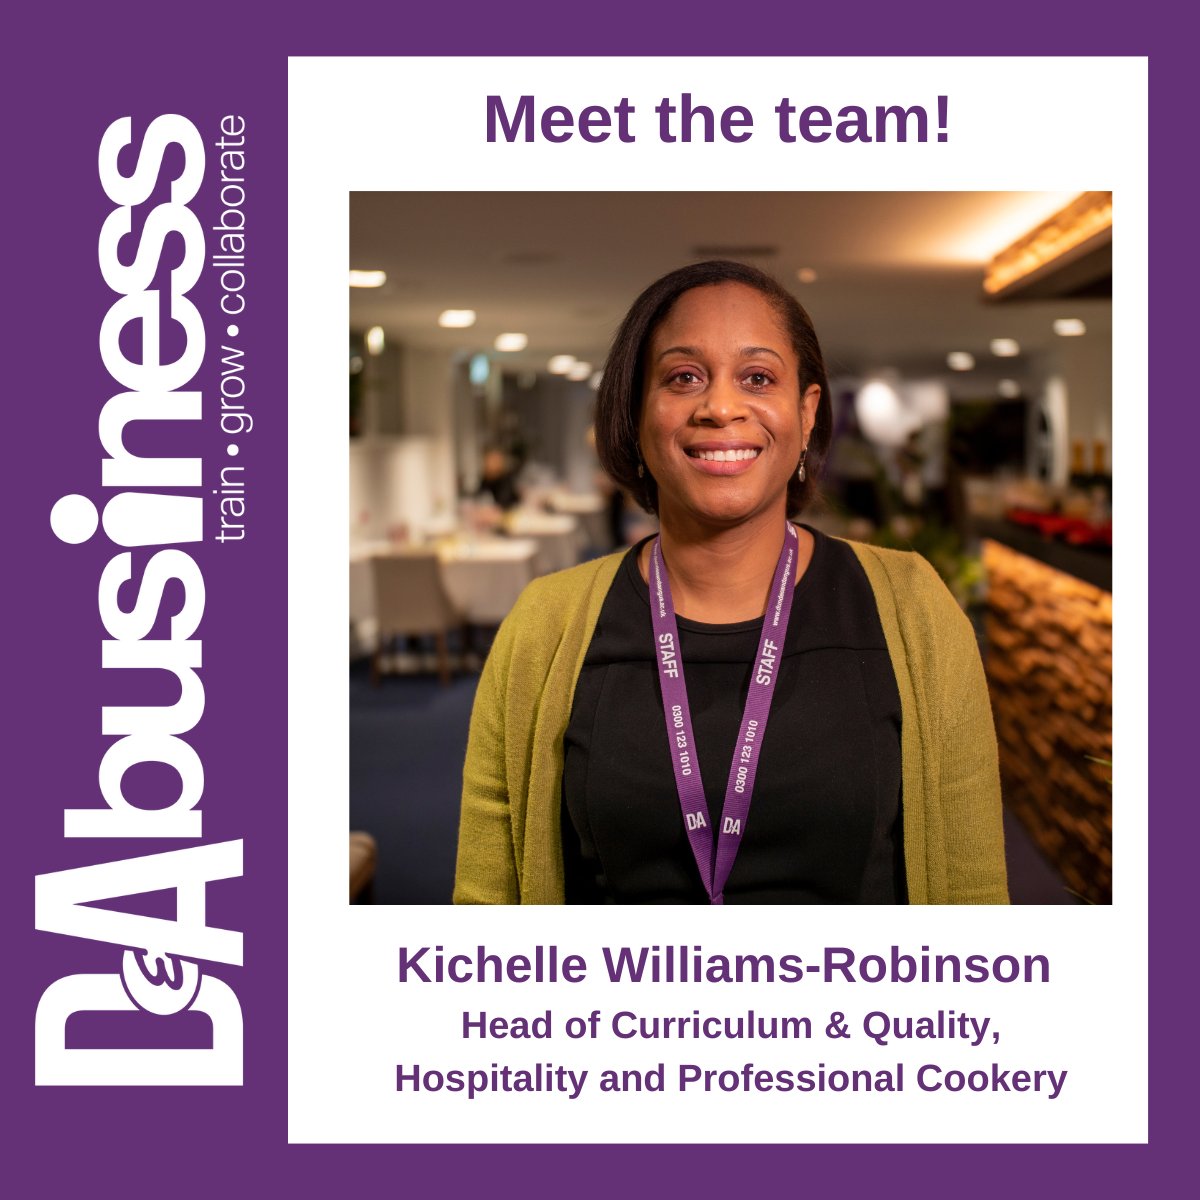 Meet Kichelle Williams-Robinson, our Head of Curriculum and Quality Hospitality and Professional Cookery 👋 Kichelle has always had a passion for #Hospitality and loves to support business clients with upskilling & high quality training. Read more ➡️ pulse.ly/4e7t75pwis